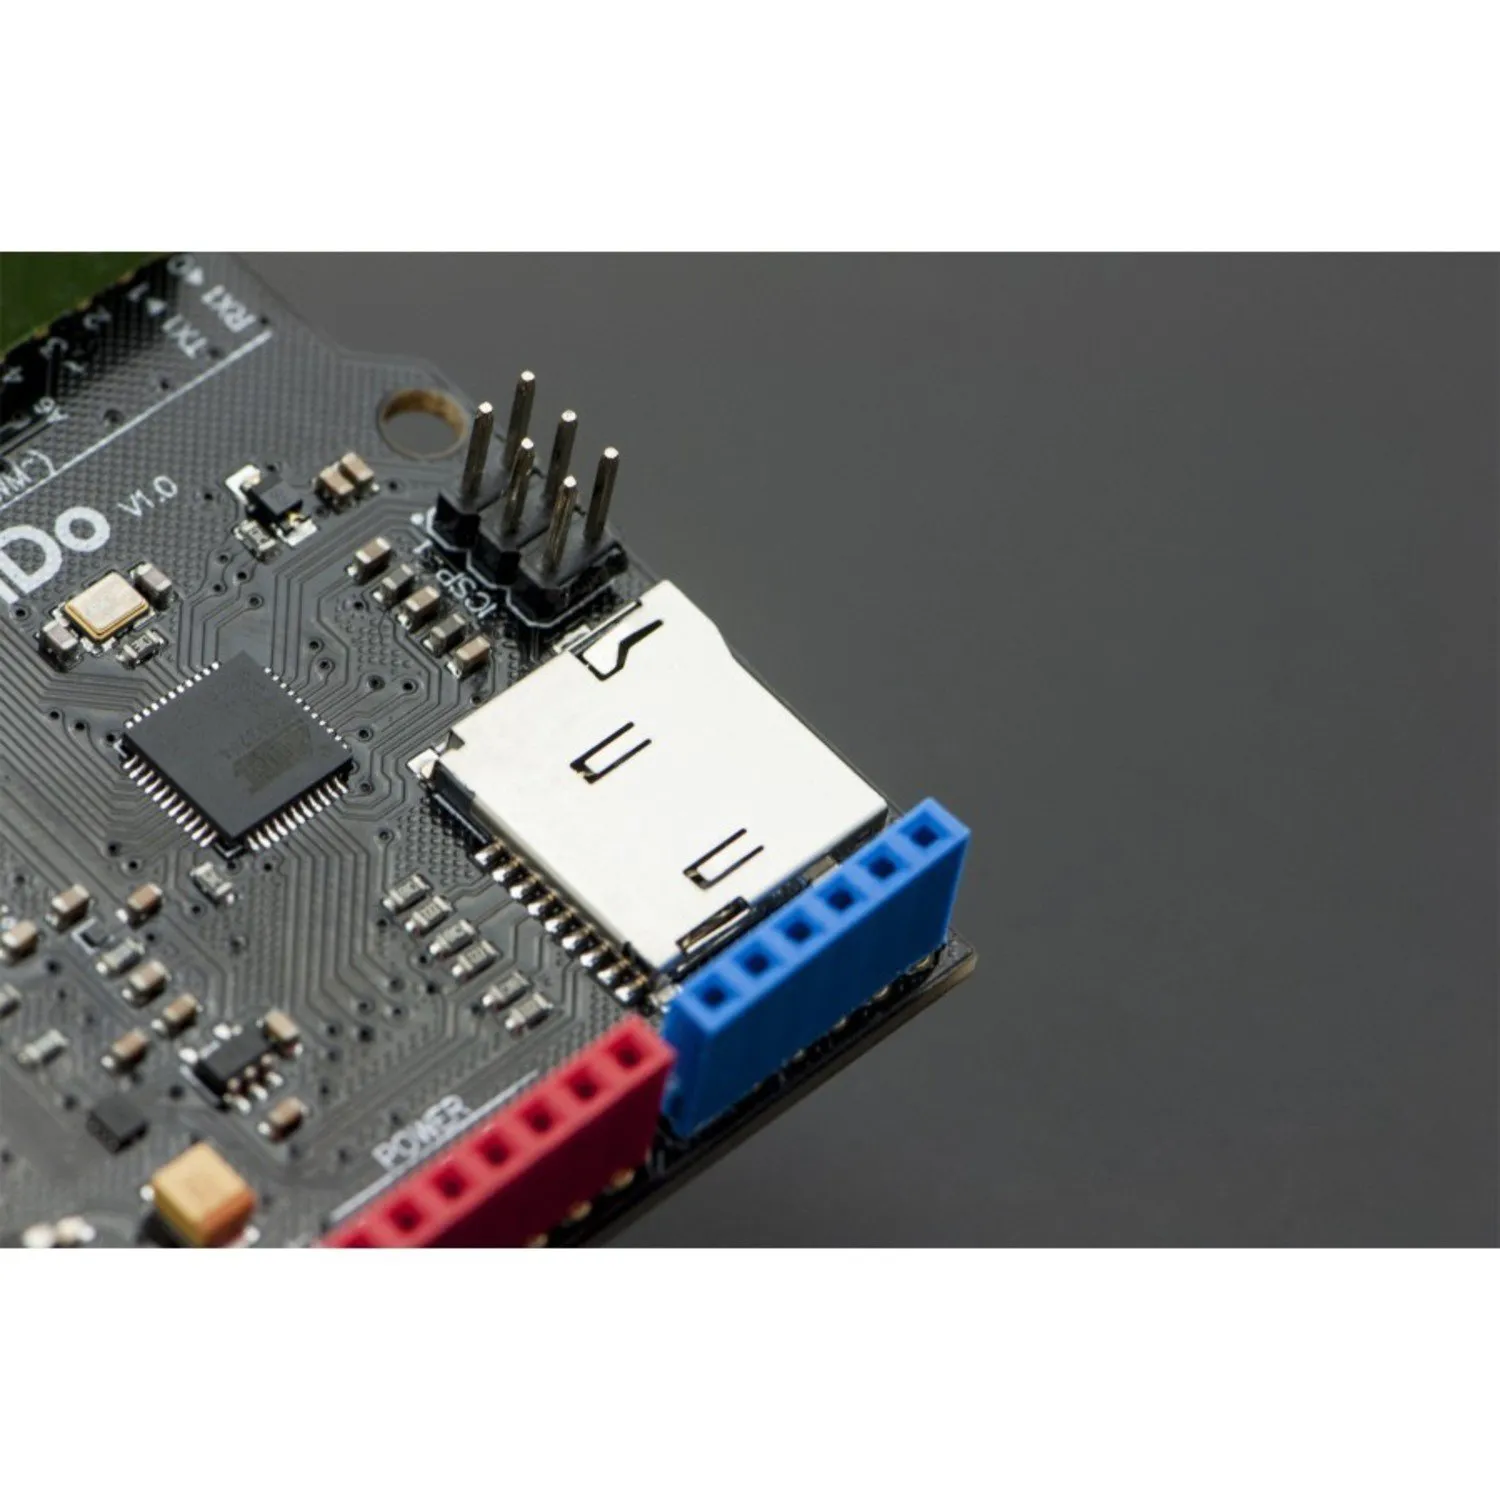 Photo of WiDo - An Arduino Compatible IoT (internet of thing) Board